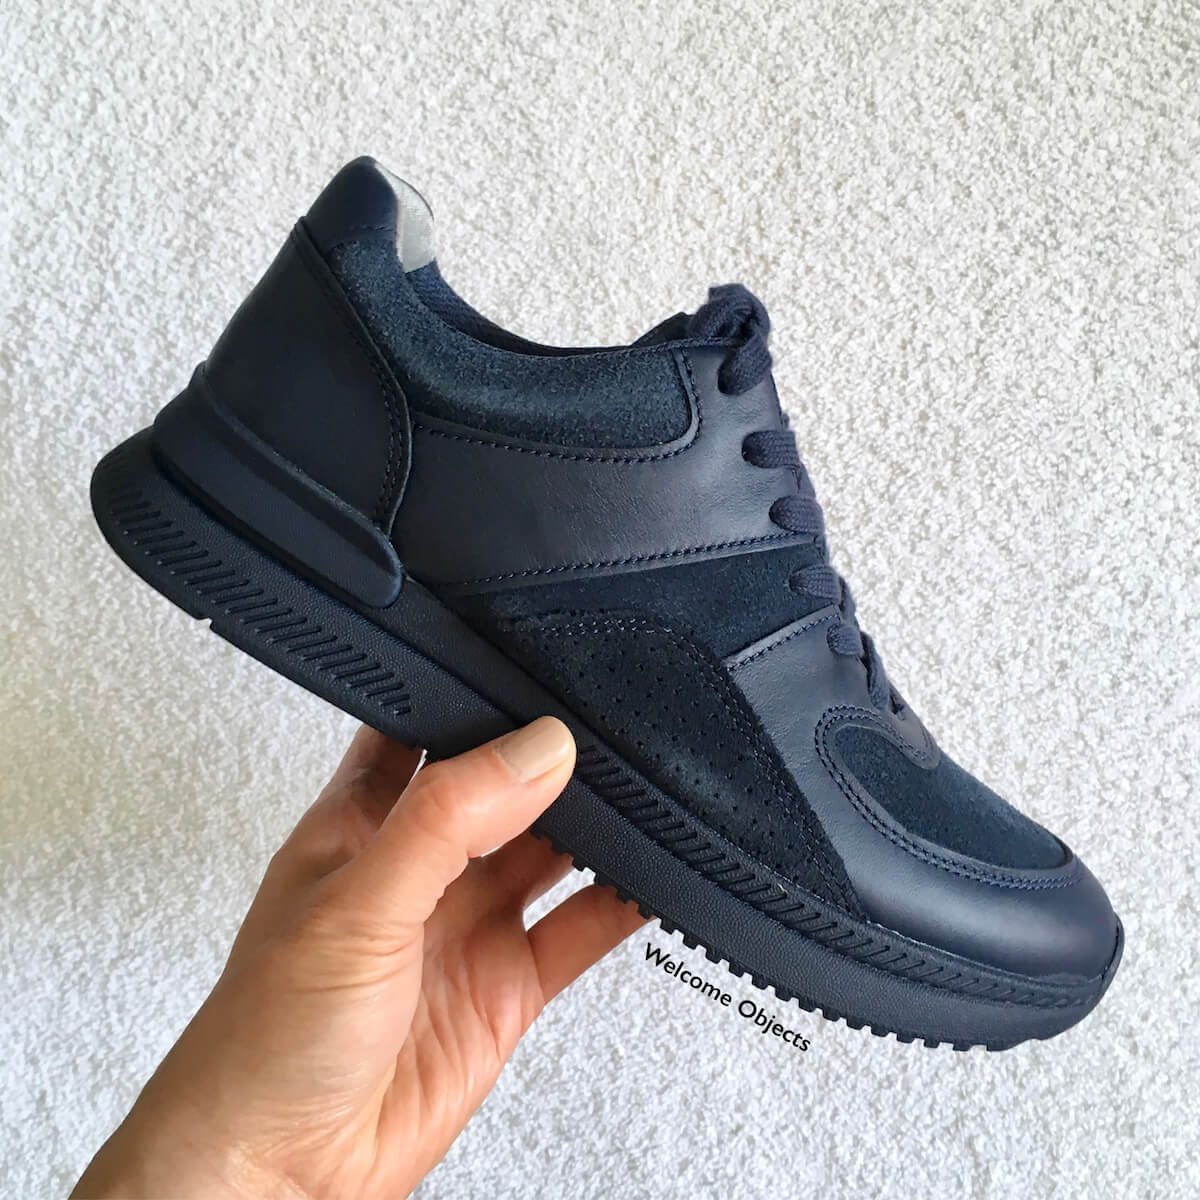 A hand holding up a navy blue Everlane trainer sneaker